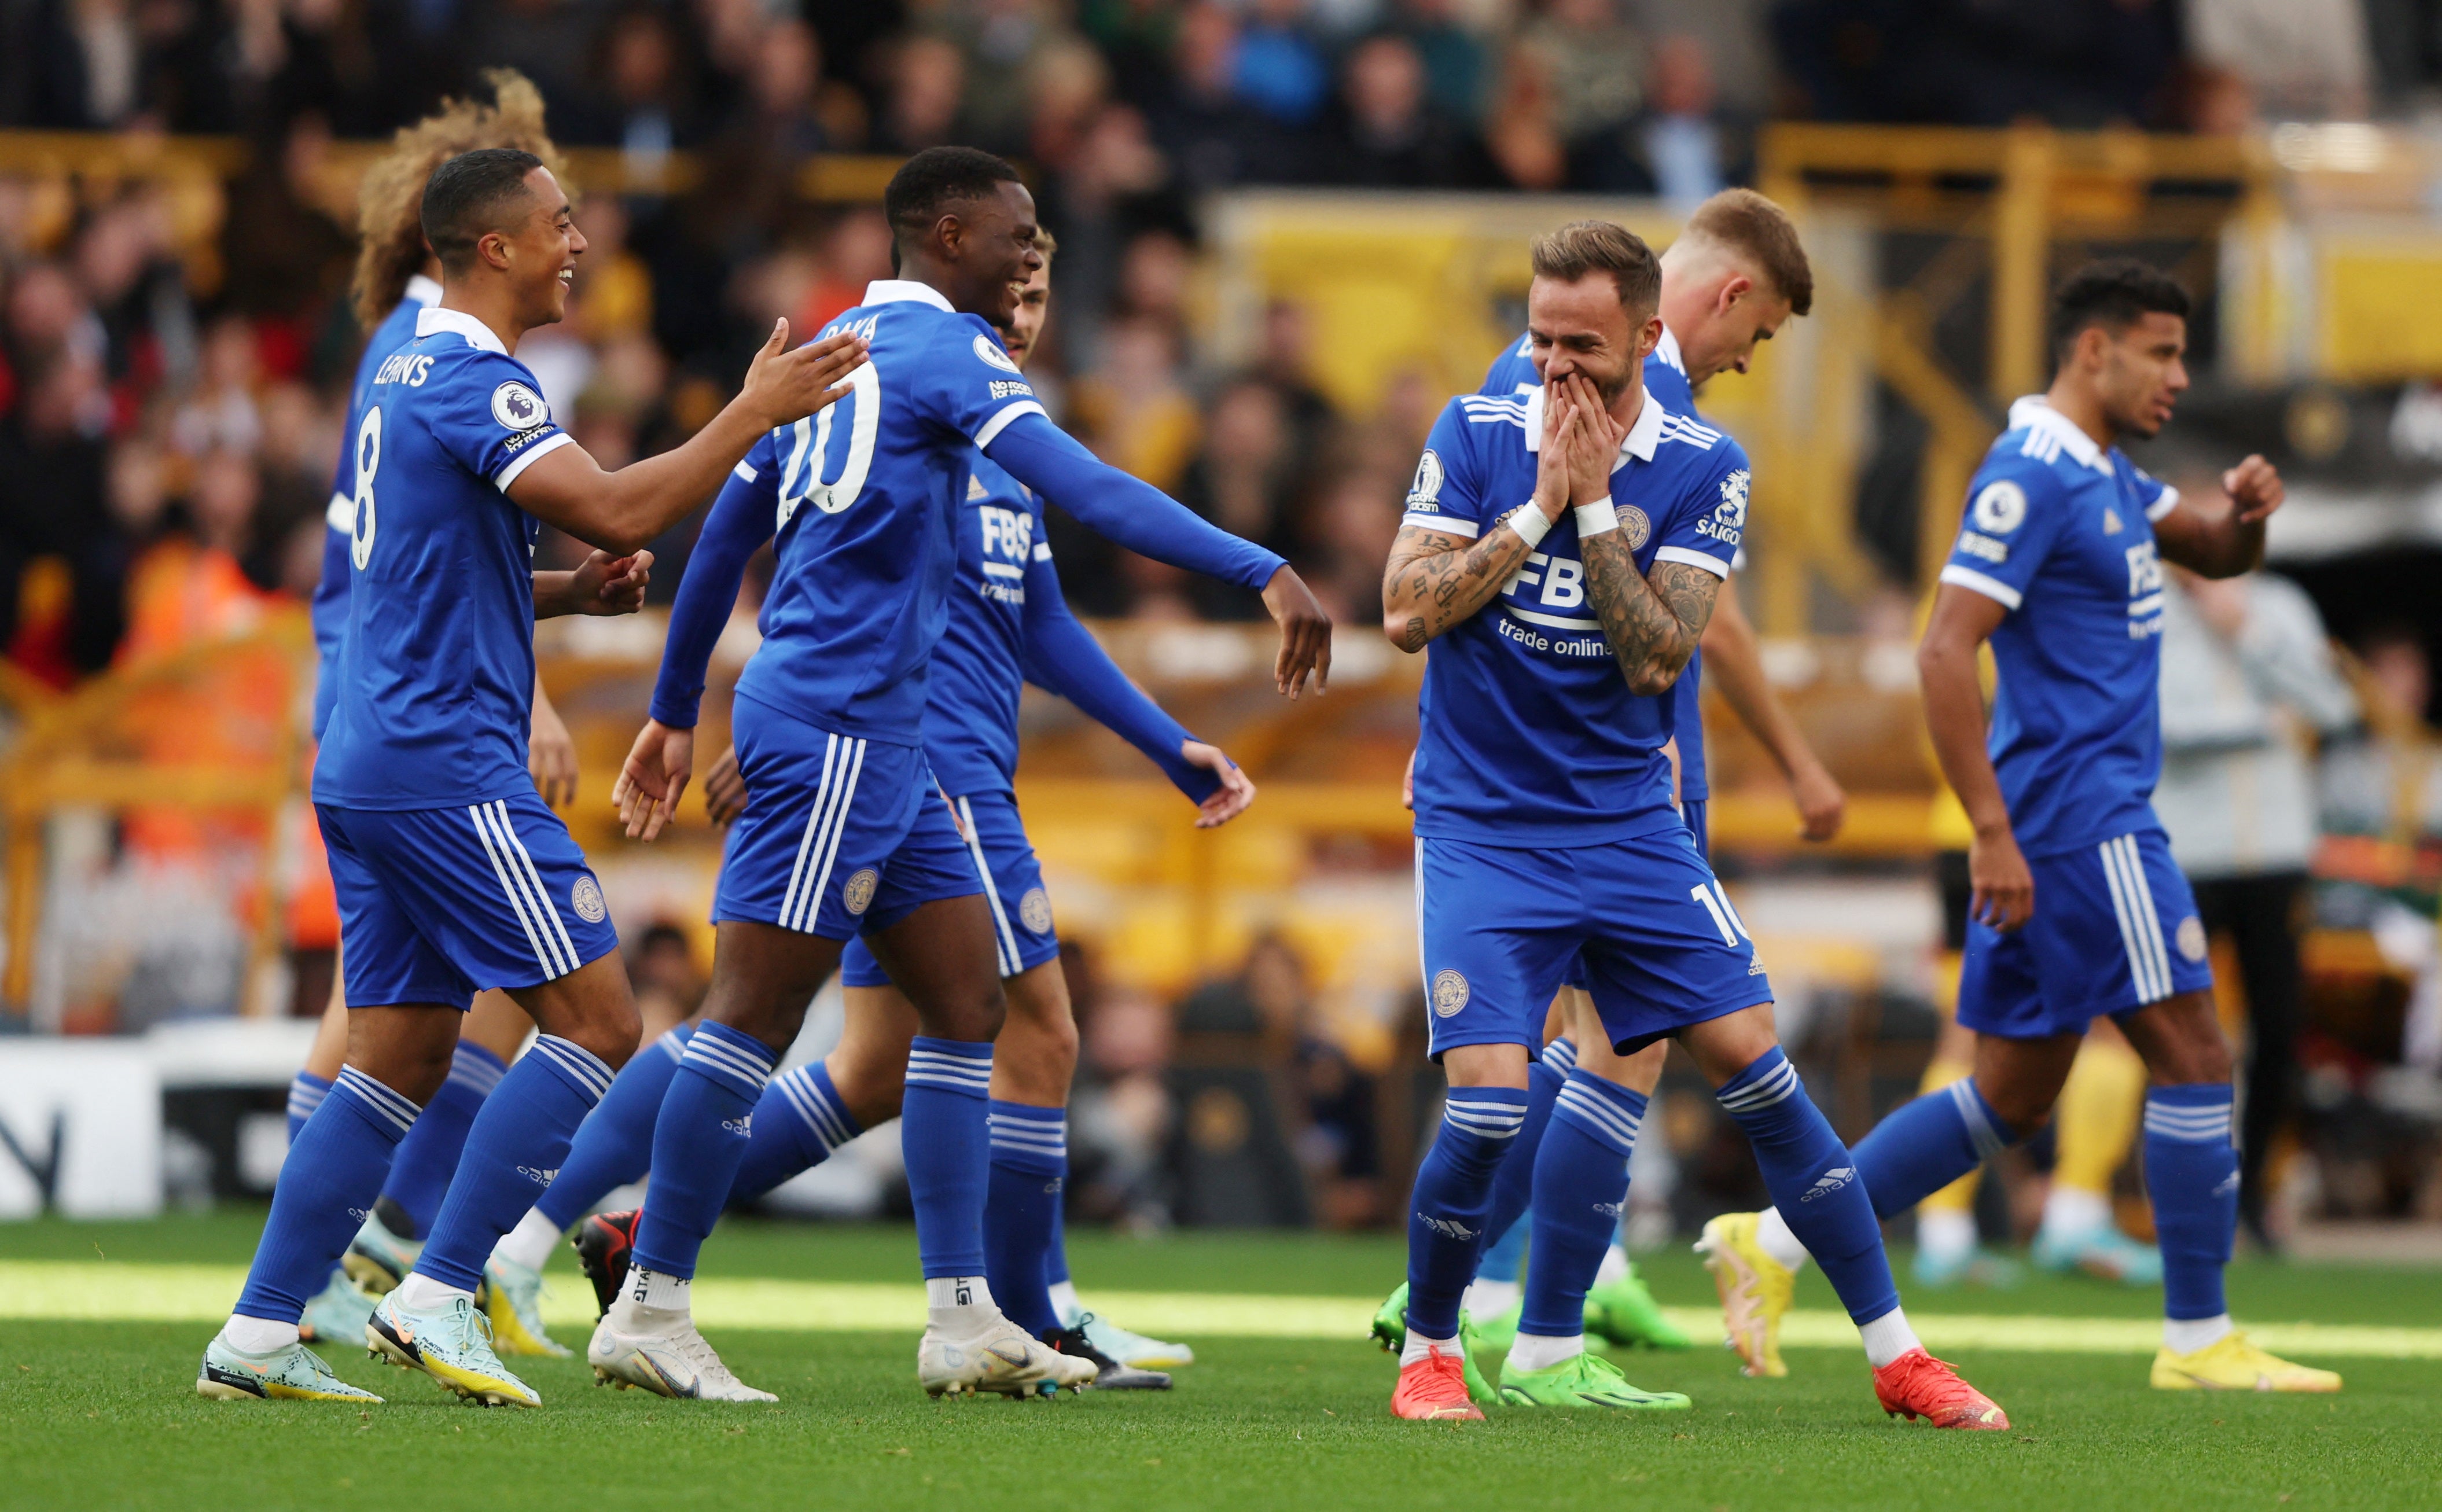 Leicester celebrate their opener, scored by Youri Tielemans